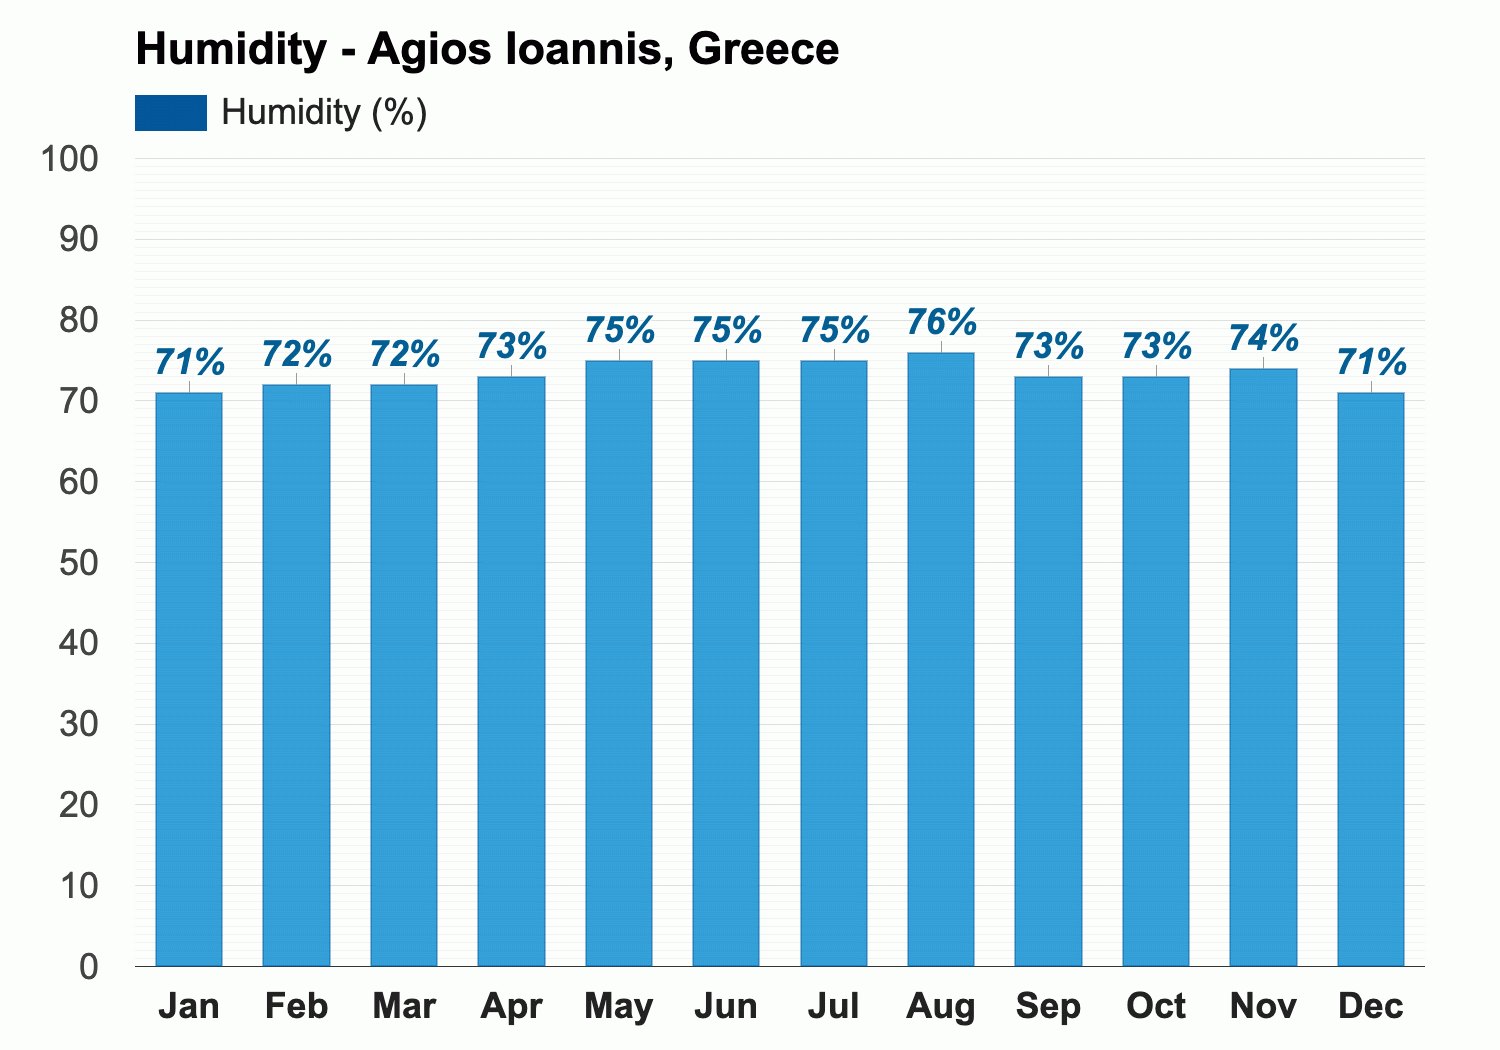 Agios Ioannis, Greece - June weather forecast and climate information |  Weather Atlas